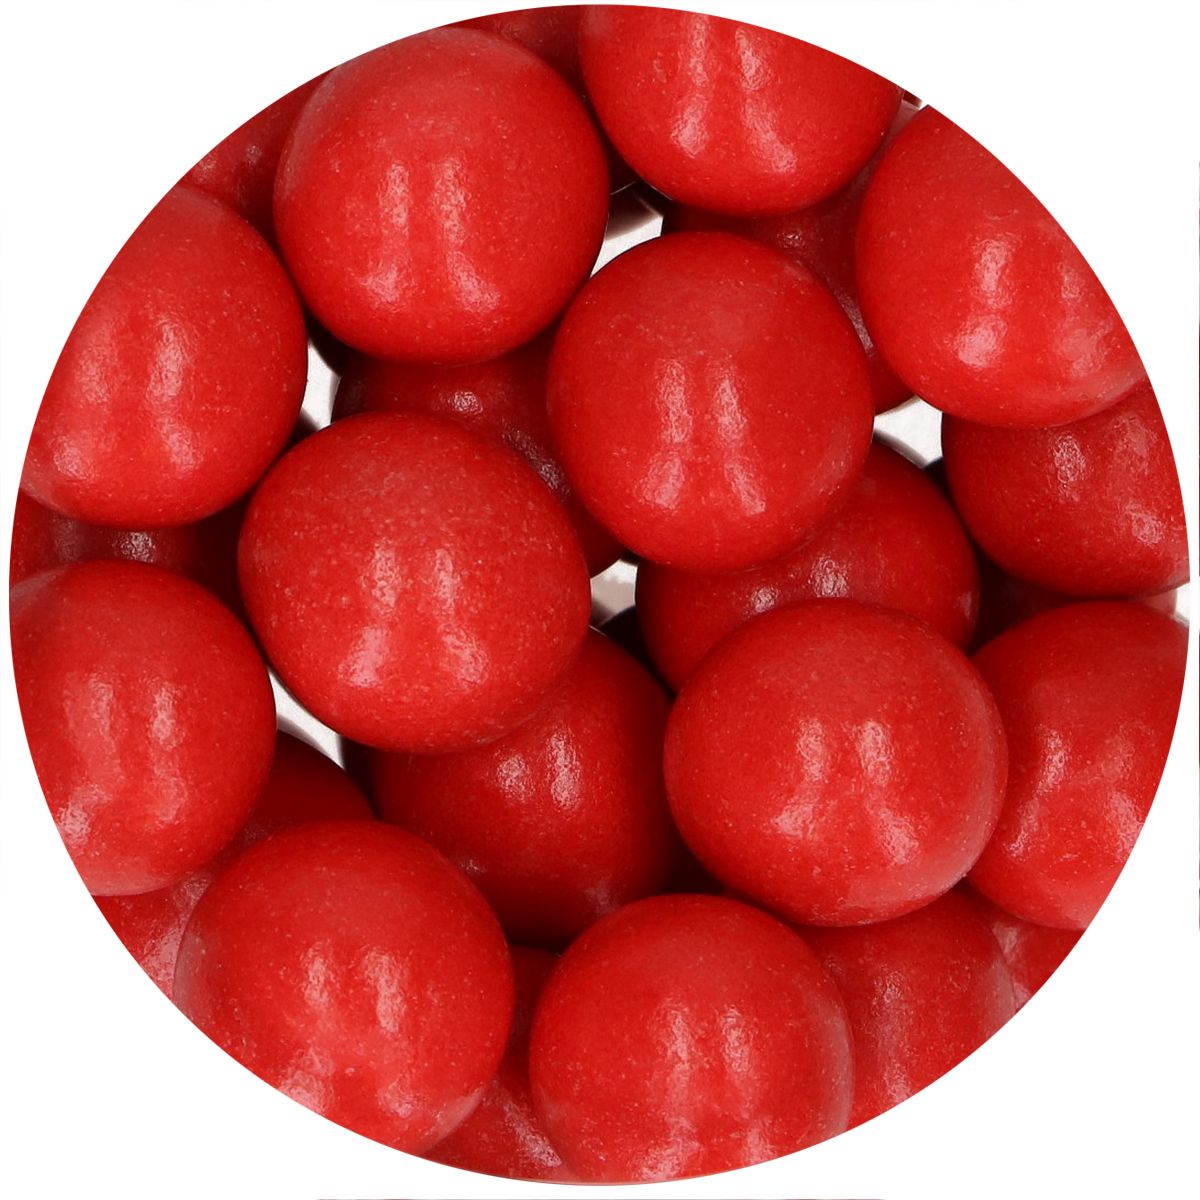 Boules Choco XXL - Pearl Red 130g